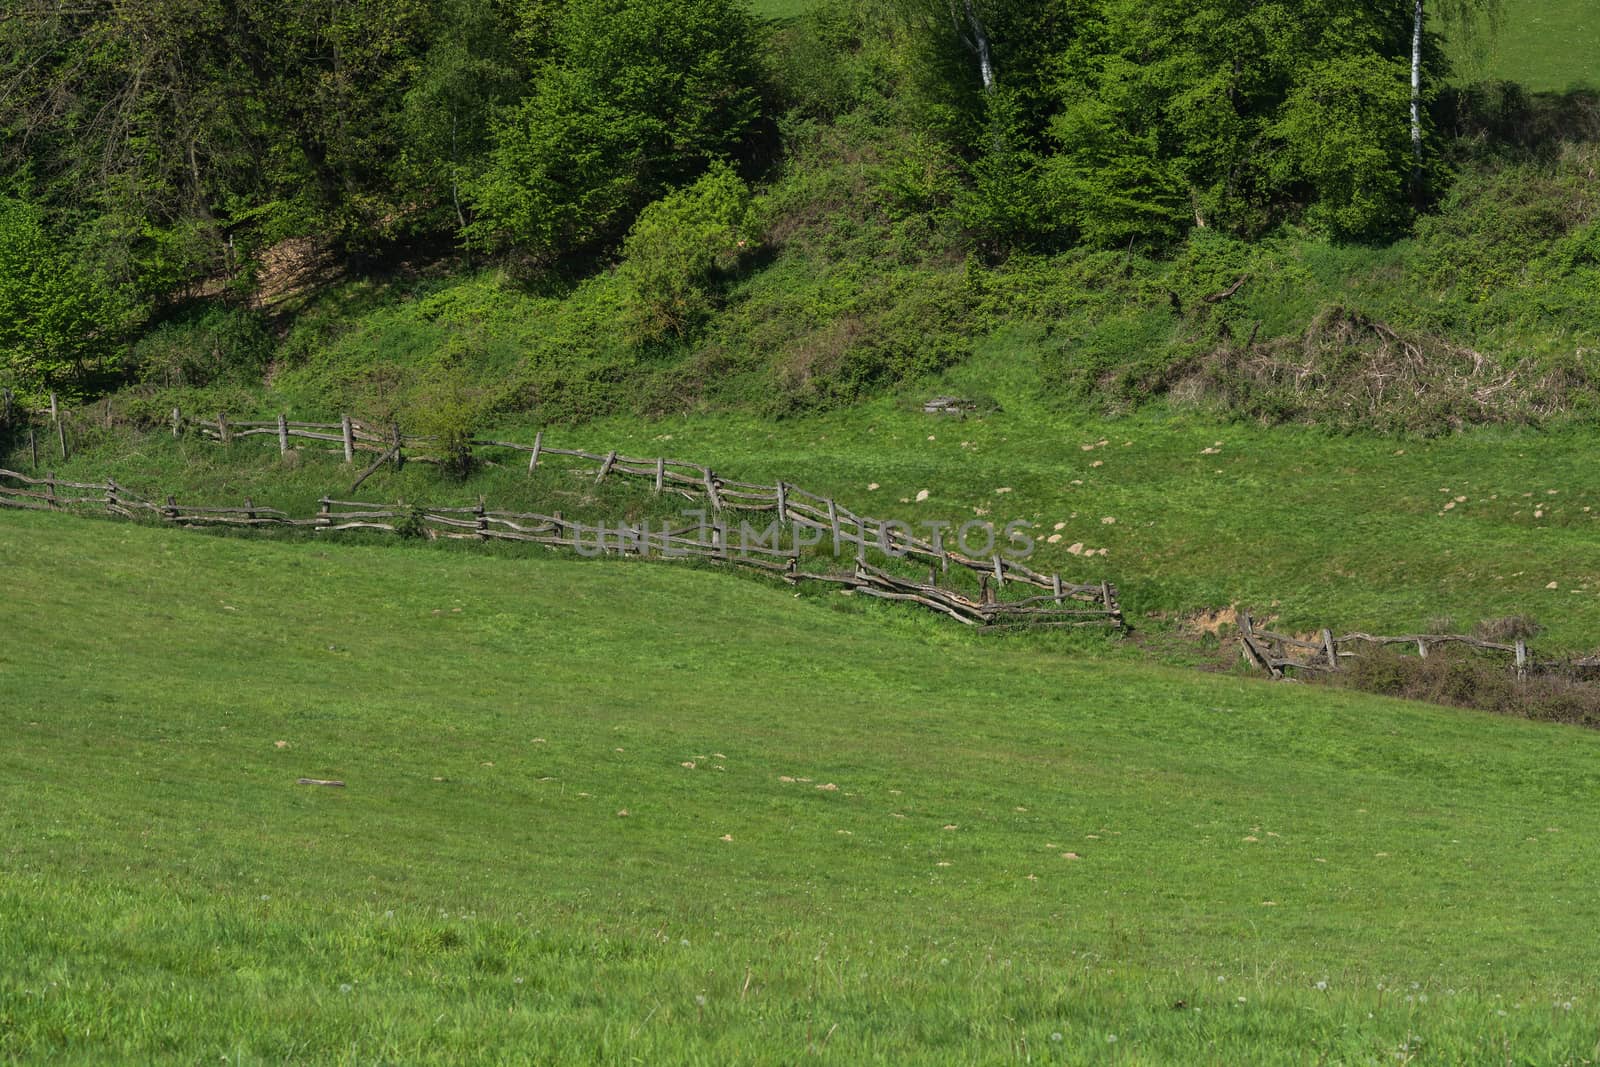 Panorama of a typical alpine meadow with wood fence.
Mountain and valley